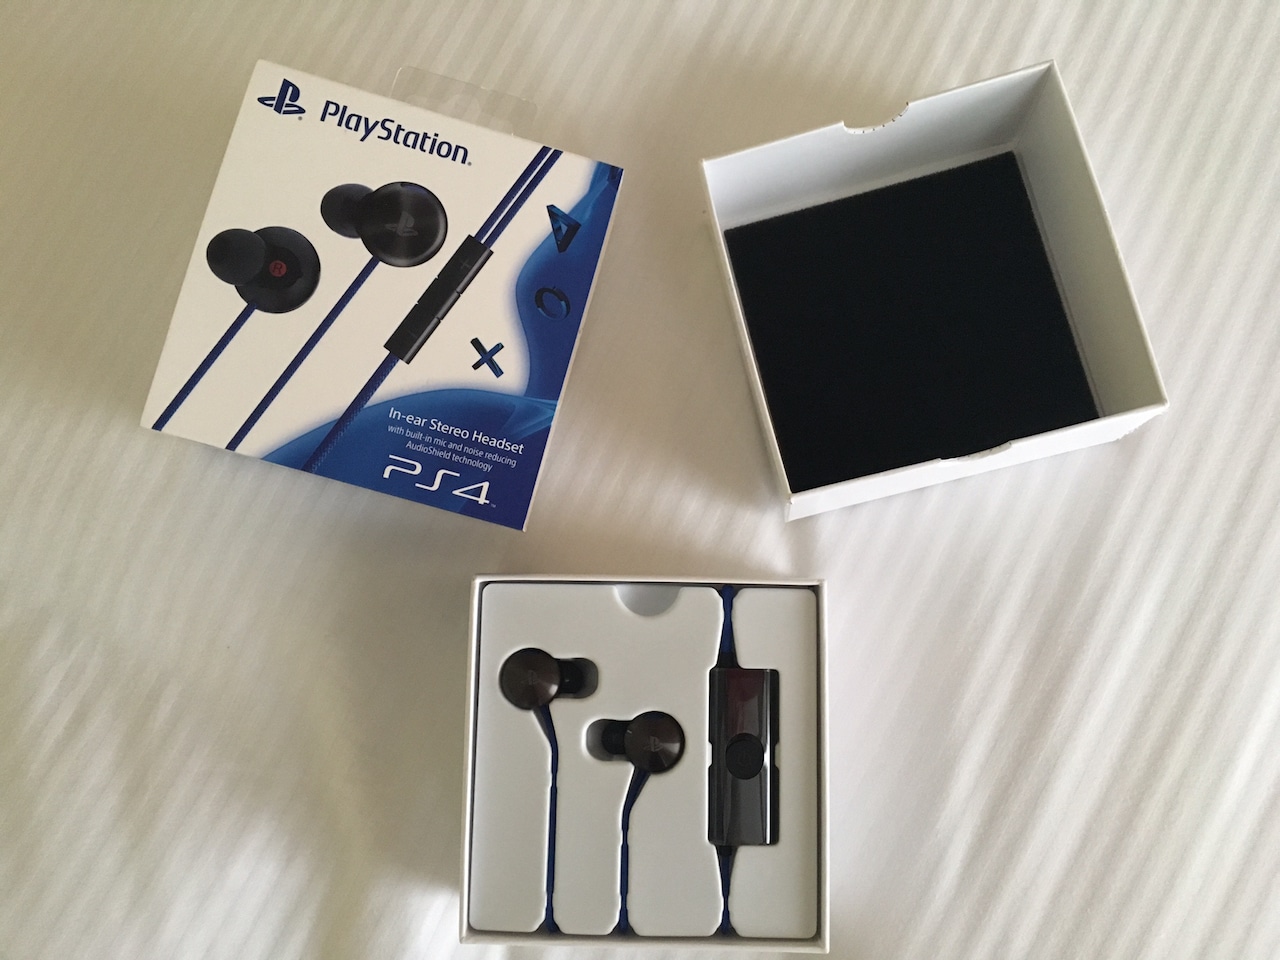 PS4 In-Ear noise reducing headset is really good | Igor Kromin